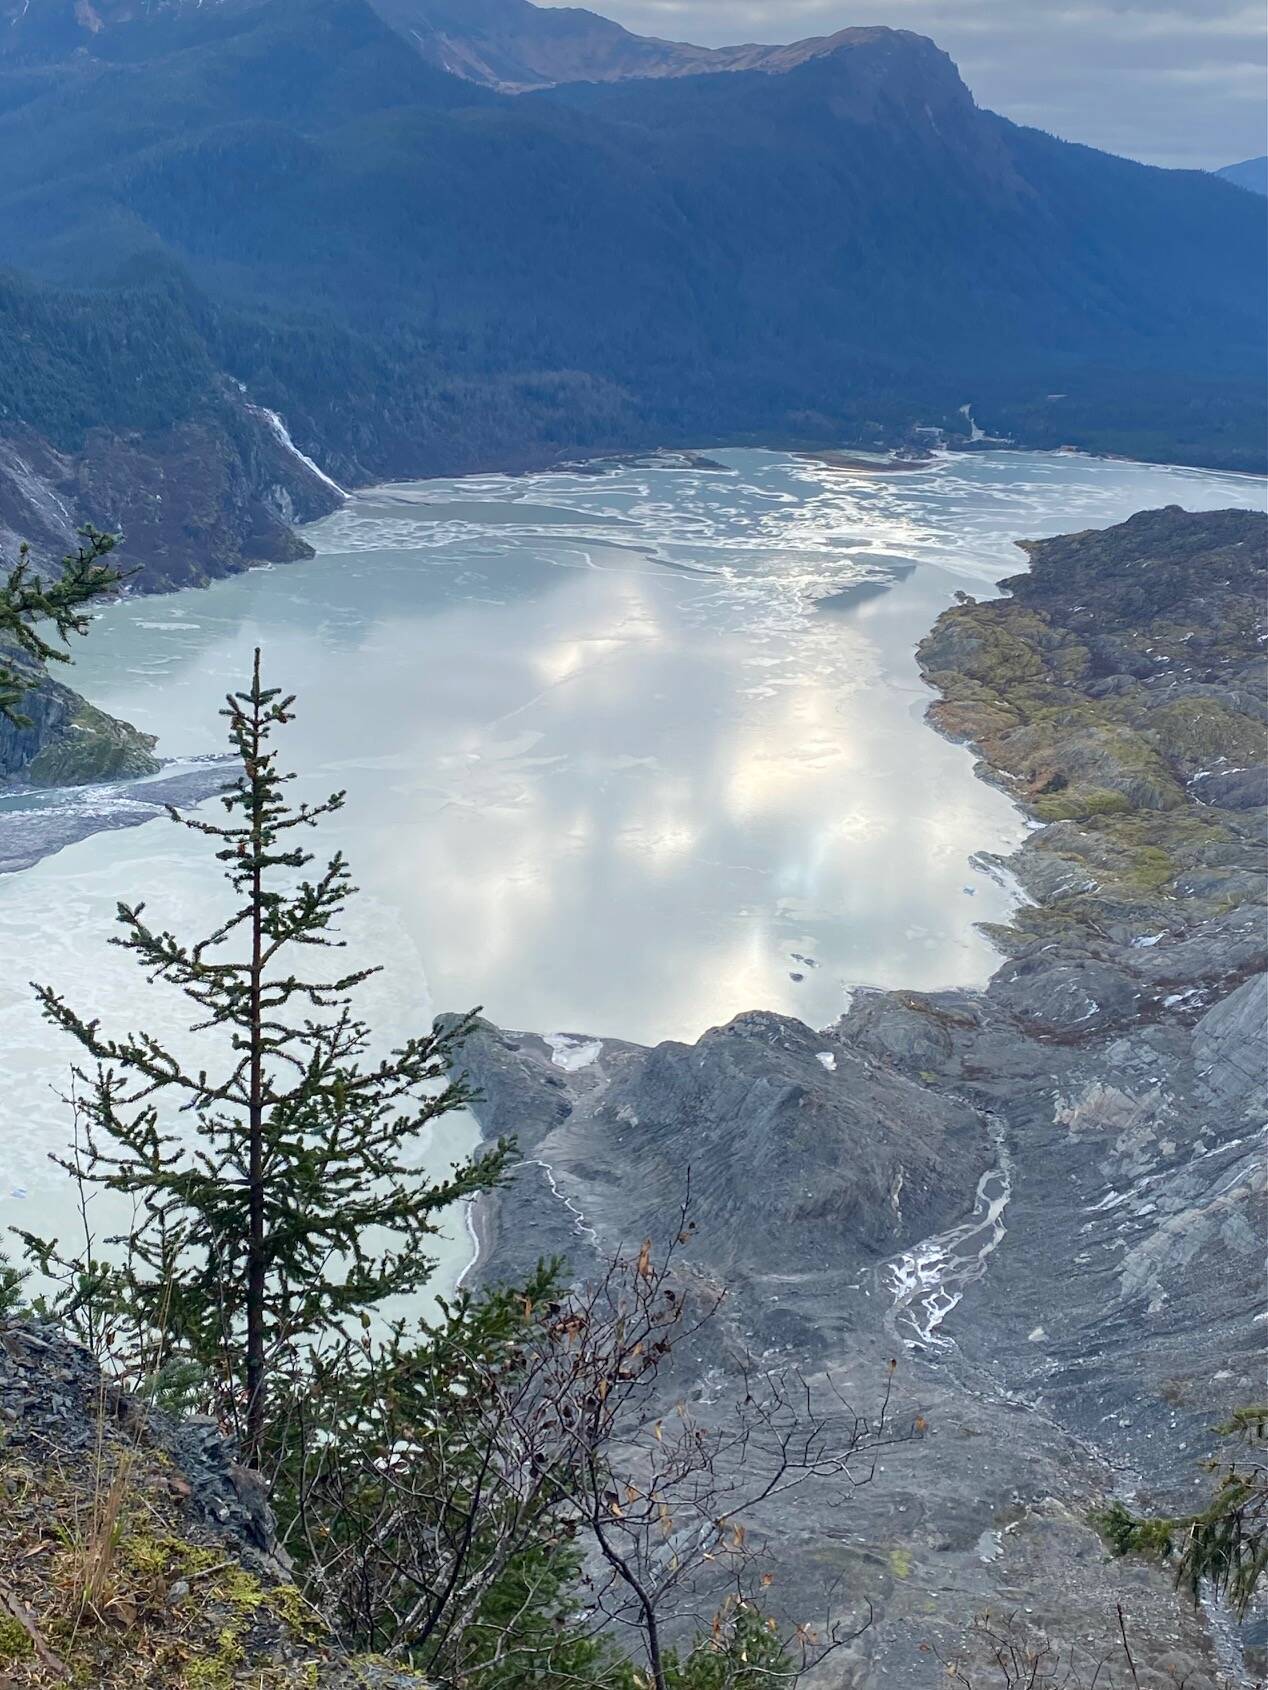 Mendenhall Lake with Nugget Falls visible in the distance as seen on Oct. 18. (Photo by Denise Carroll)